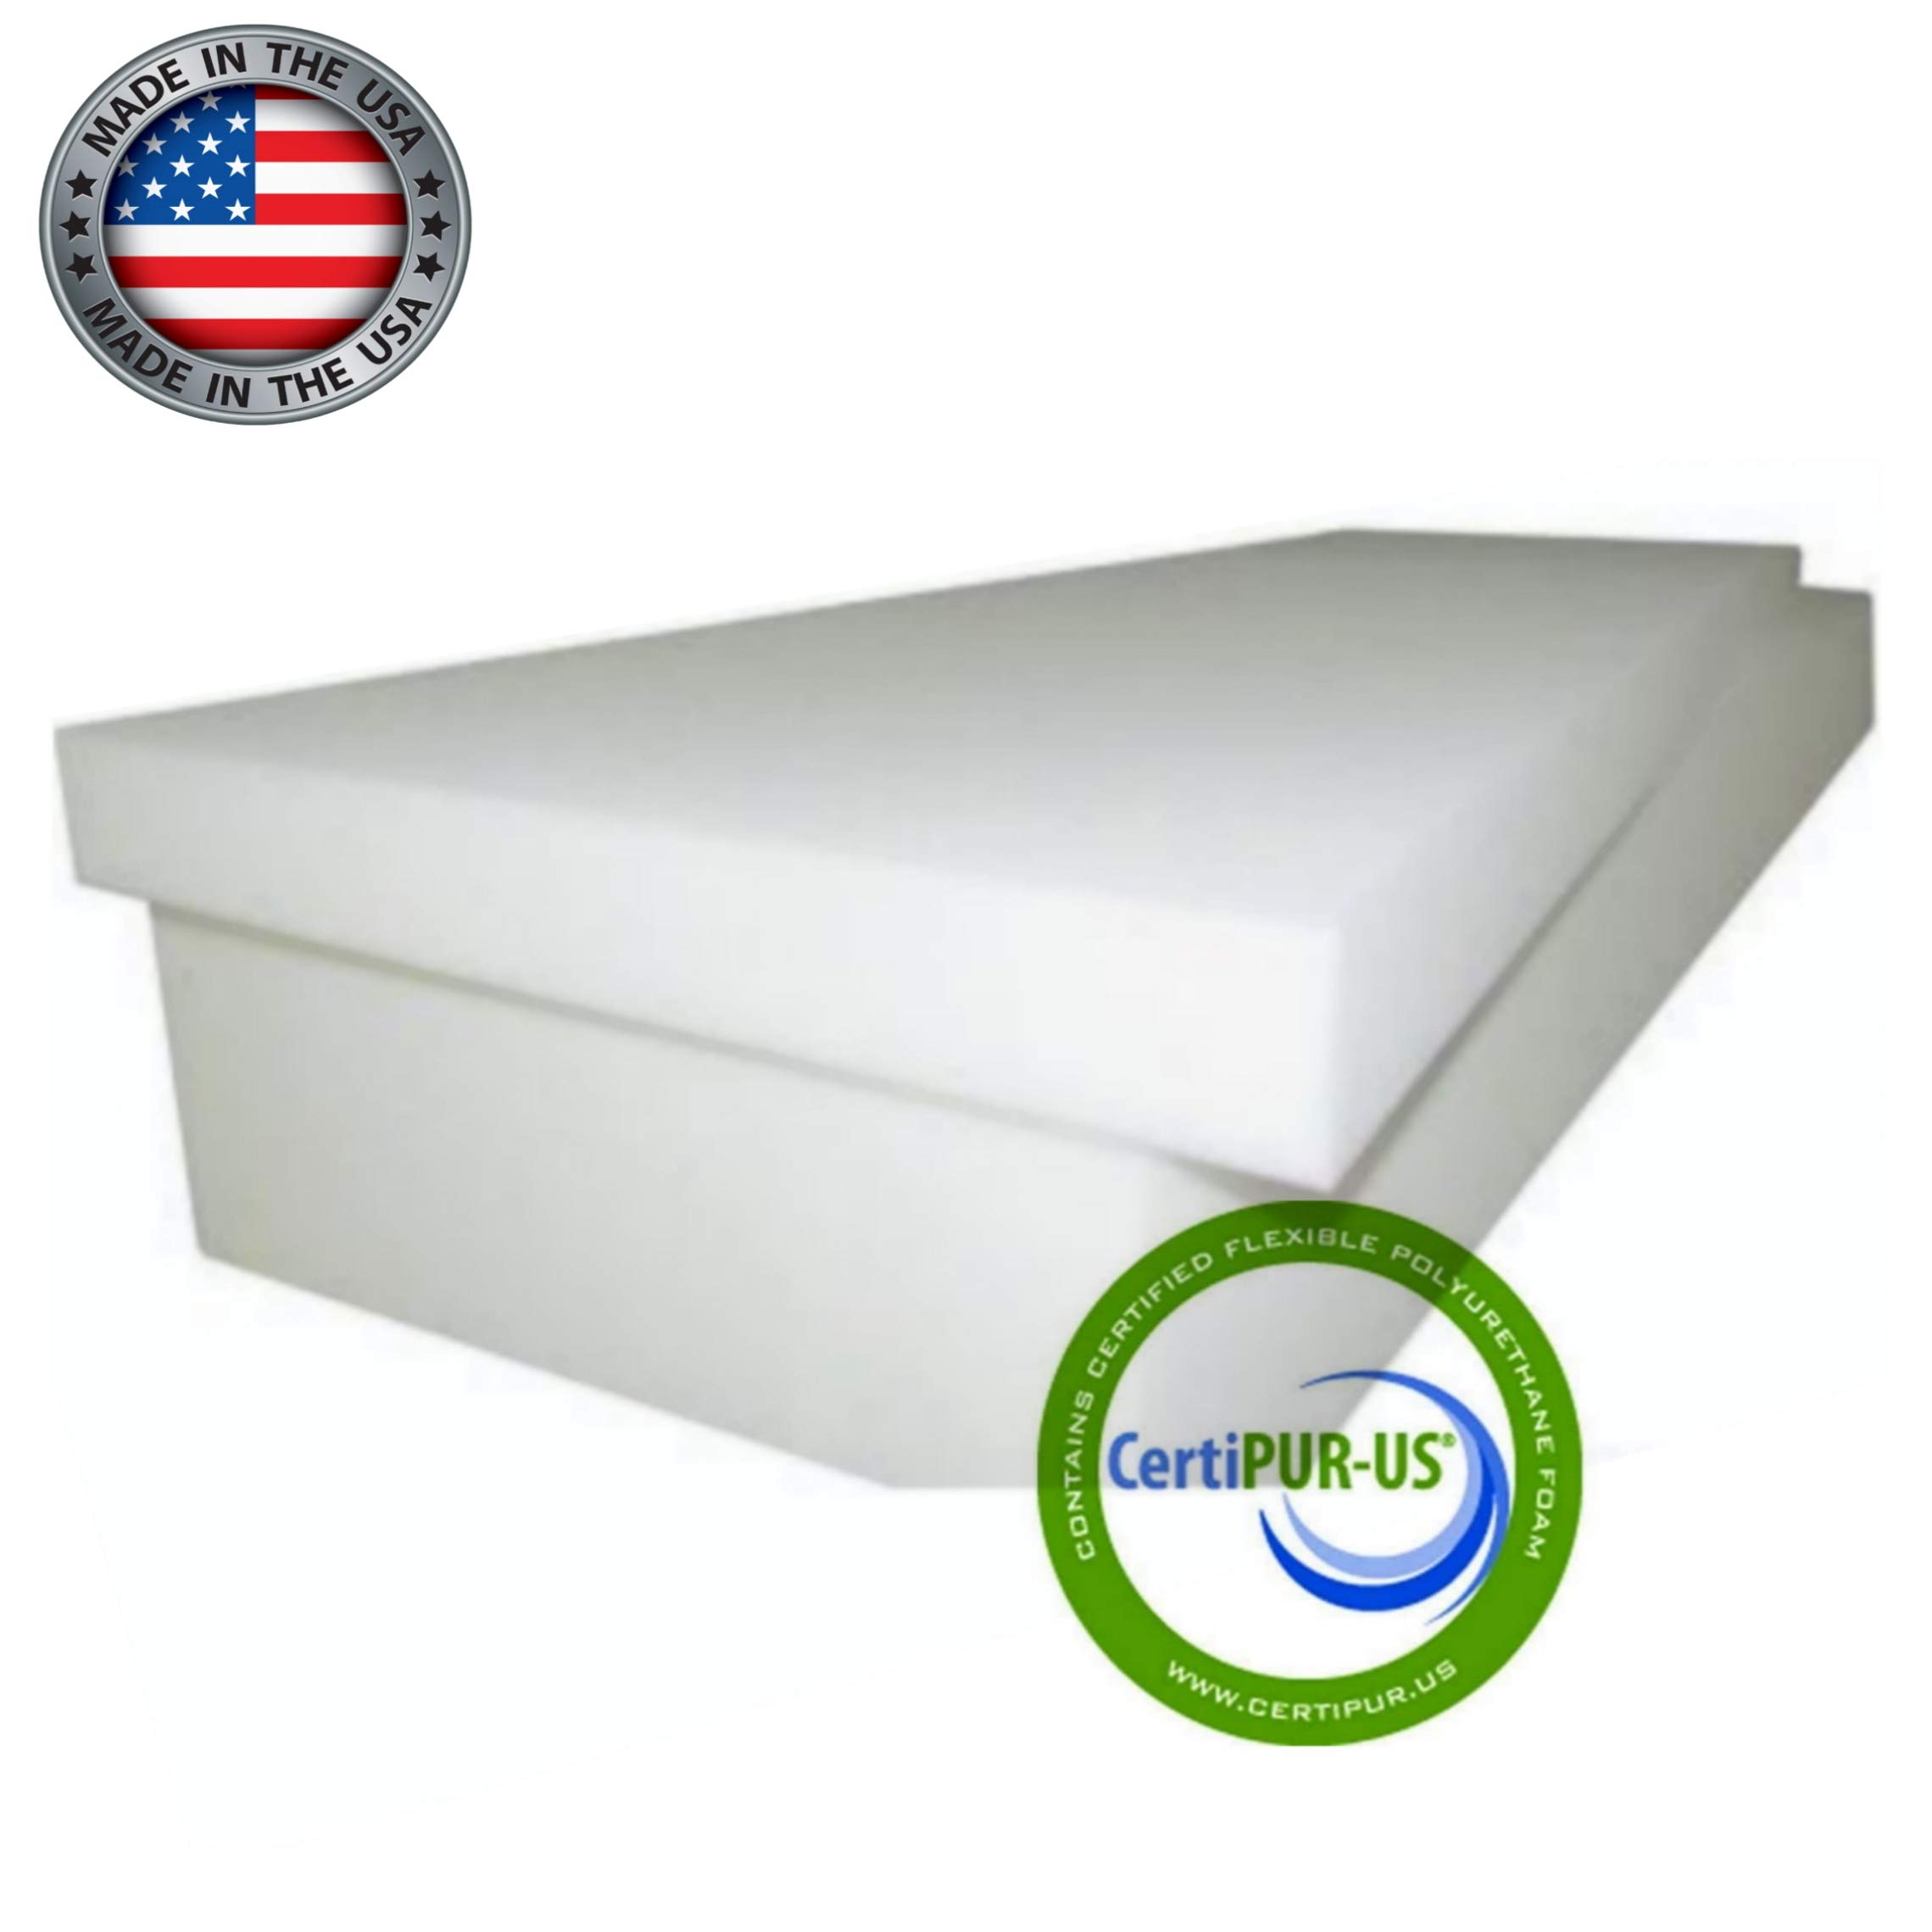 Isellfoam High Density Upholstery Foam 6 inches Height x 30 inches Width x 80 inches Length (Firm) Density 46ILD High Density Upholstery Foam Cushion CertiPUR-US Certified Foam, Made in USA